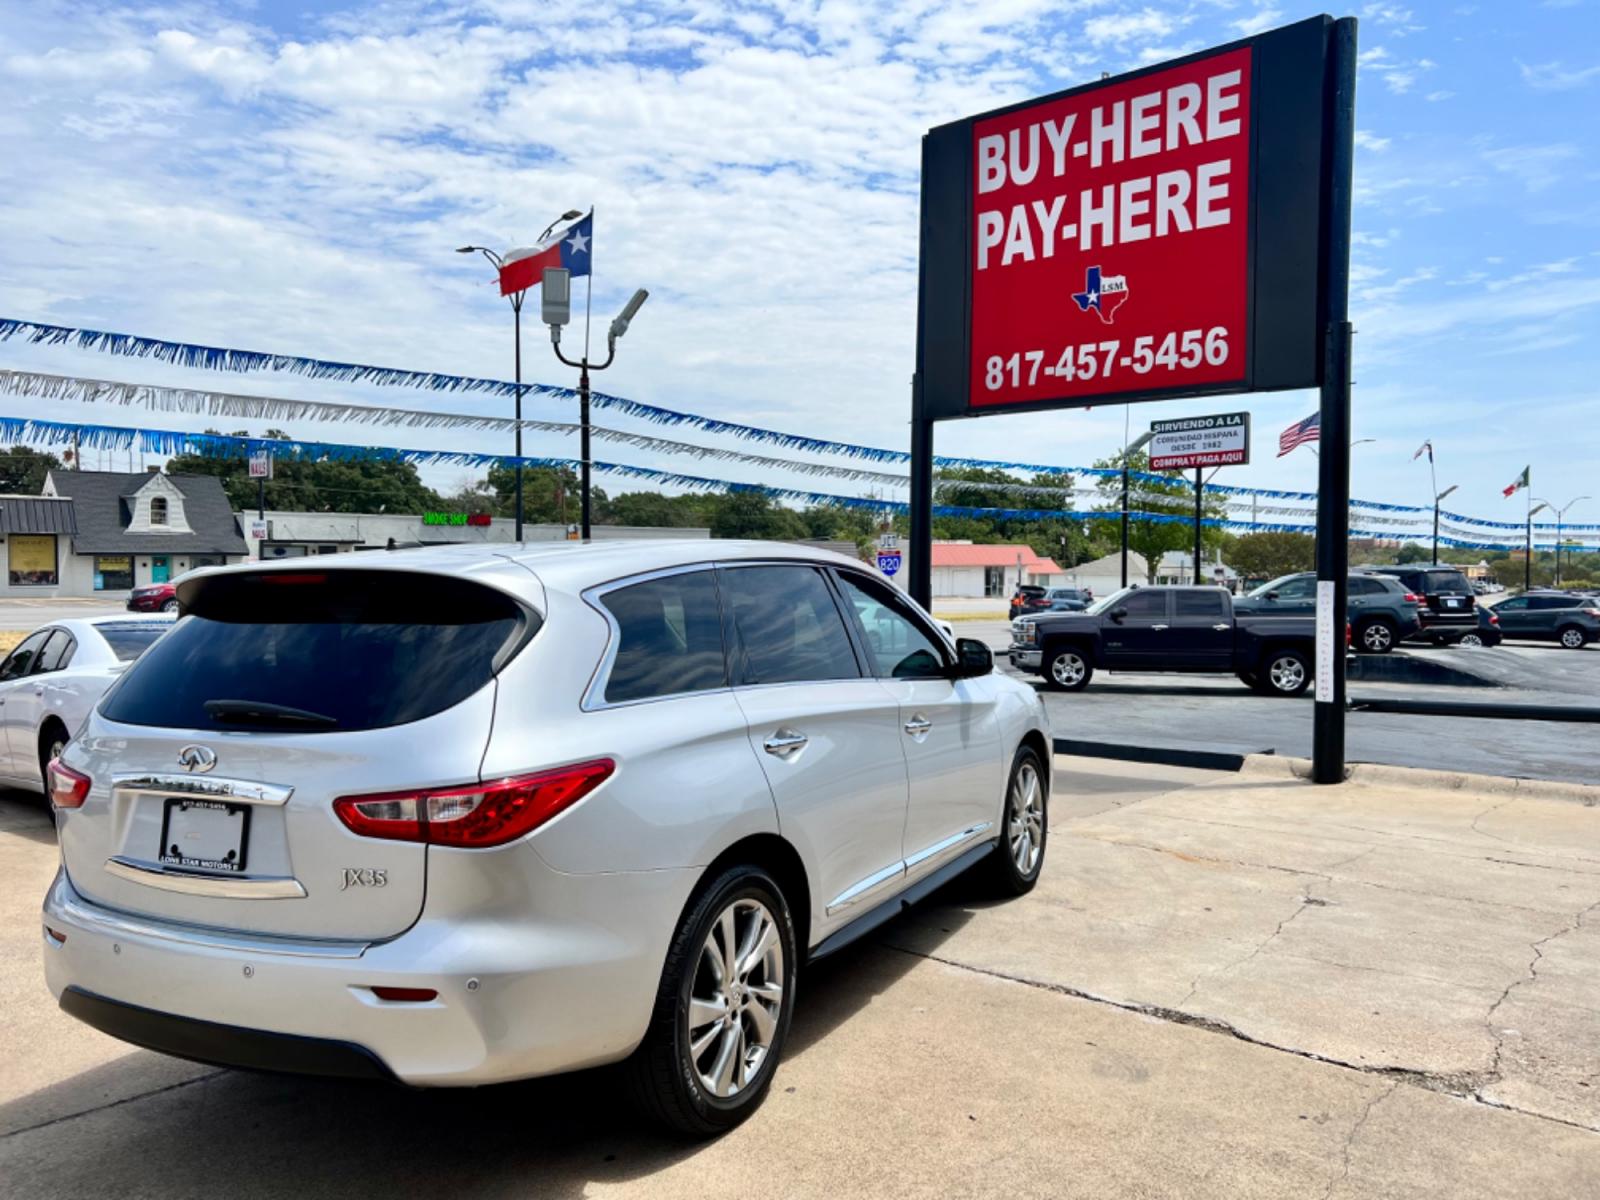 2013 SILVER INFINITI JX35 (5N1AL0MM3DC) , located at 5900 E. Lancaster Ave., Fort Worth, TX, 76112, (817) 457-5456, 0.000000, 0.000000 - This is a 2013 INFINITI JX35 4 DOOR SUV that is in excellent condition. There are no dents or scratches. The interior is clean with no rips or tears or stains. All power windows, door locks and seats. Ice cold AC for those hot Texas summer days. It is equipped with a CD player, AM/FM radio, AUX port - Photo #6